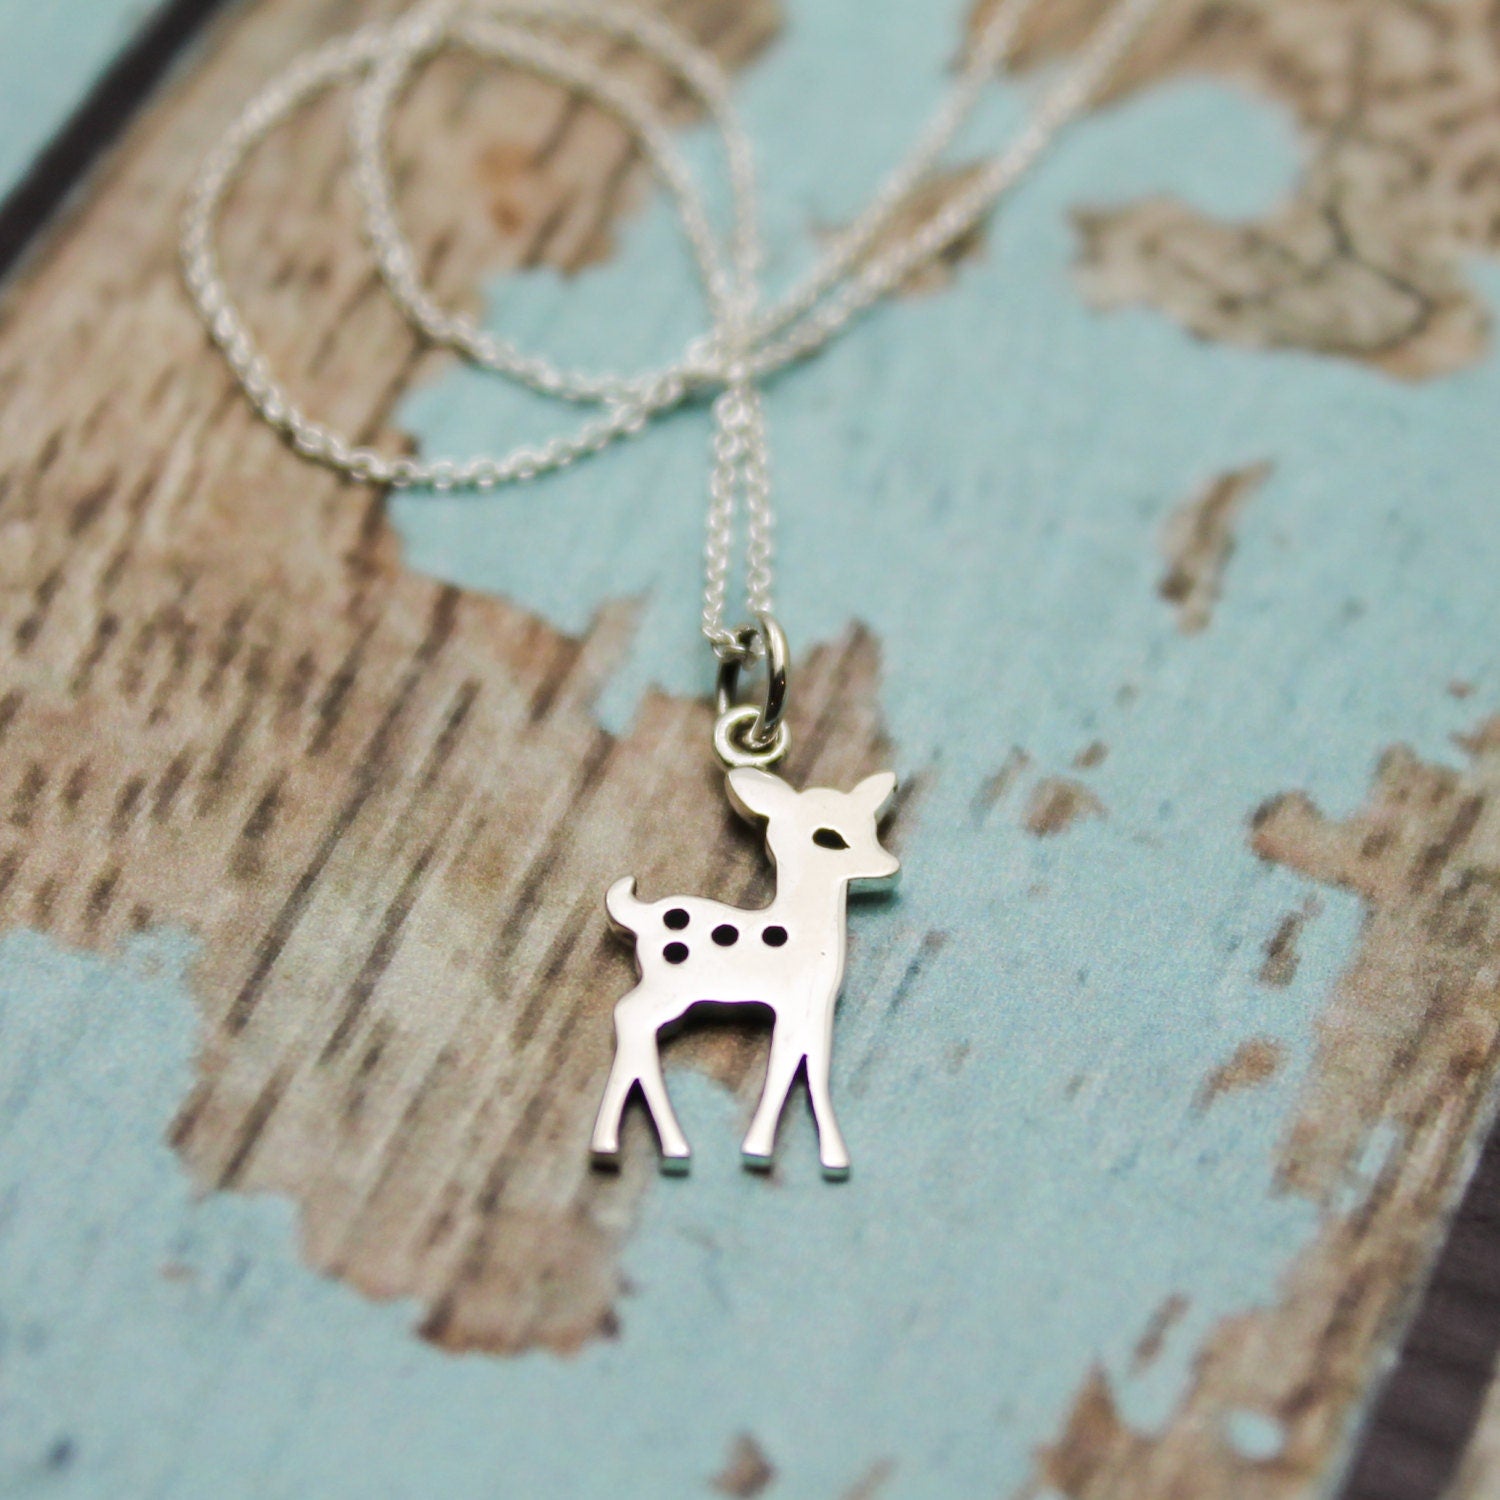 Baby Fawn Deer Charm Necklace in Sterling Silver